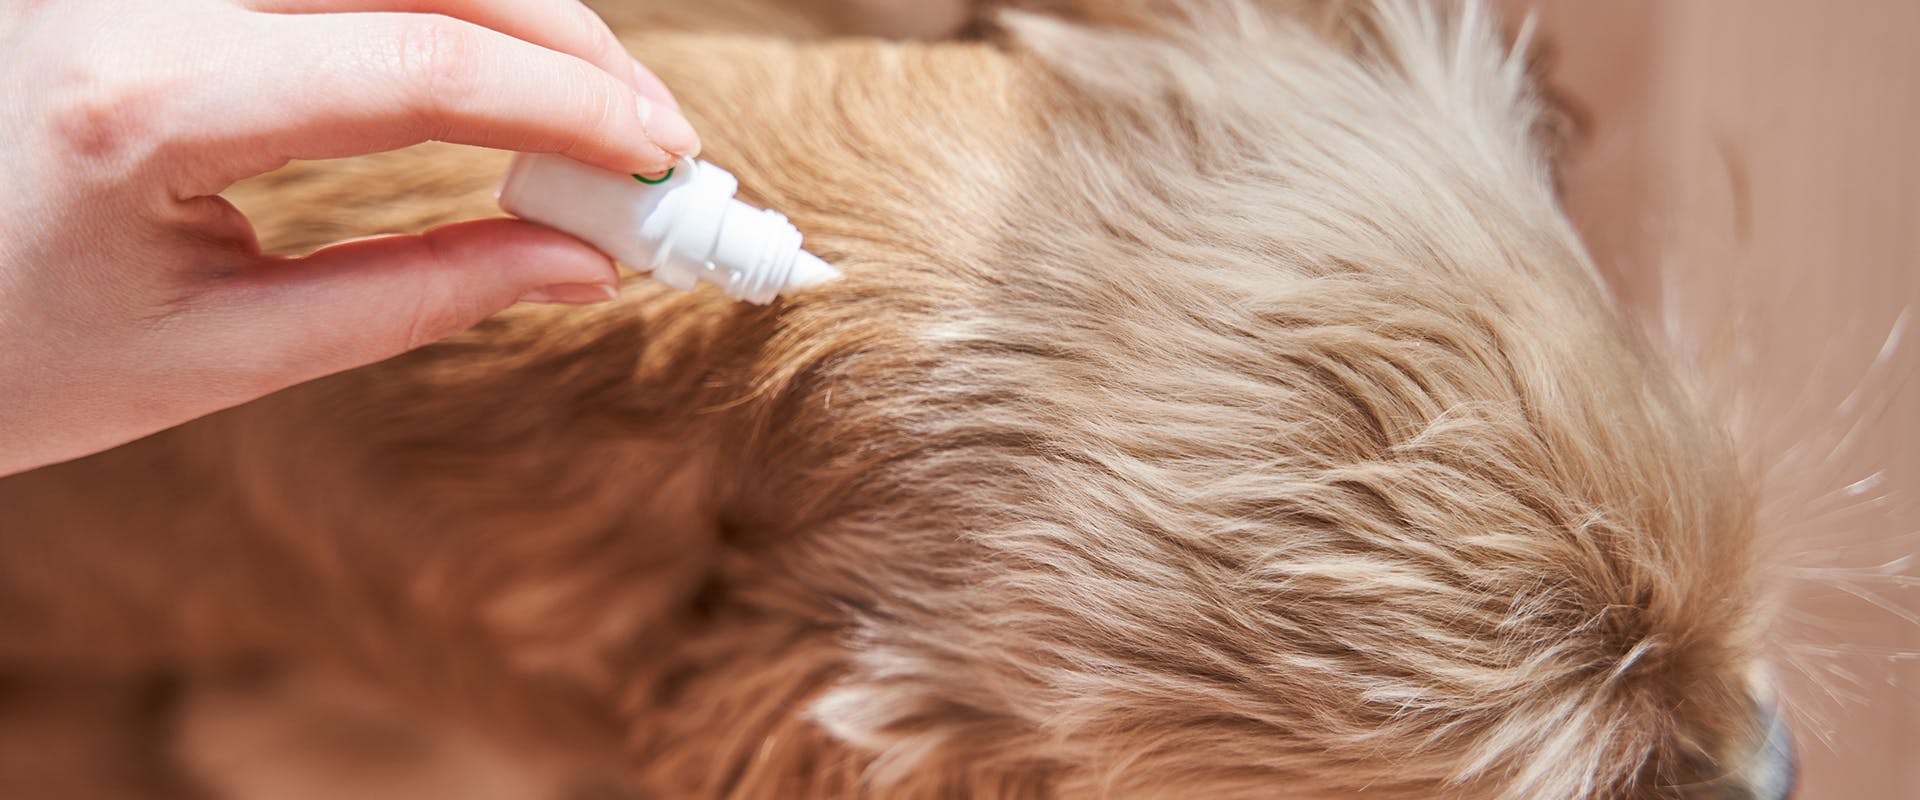 Fleas on dogs, a hand administering flea treatment on a dog's neck